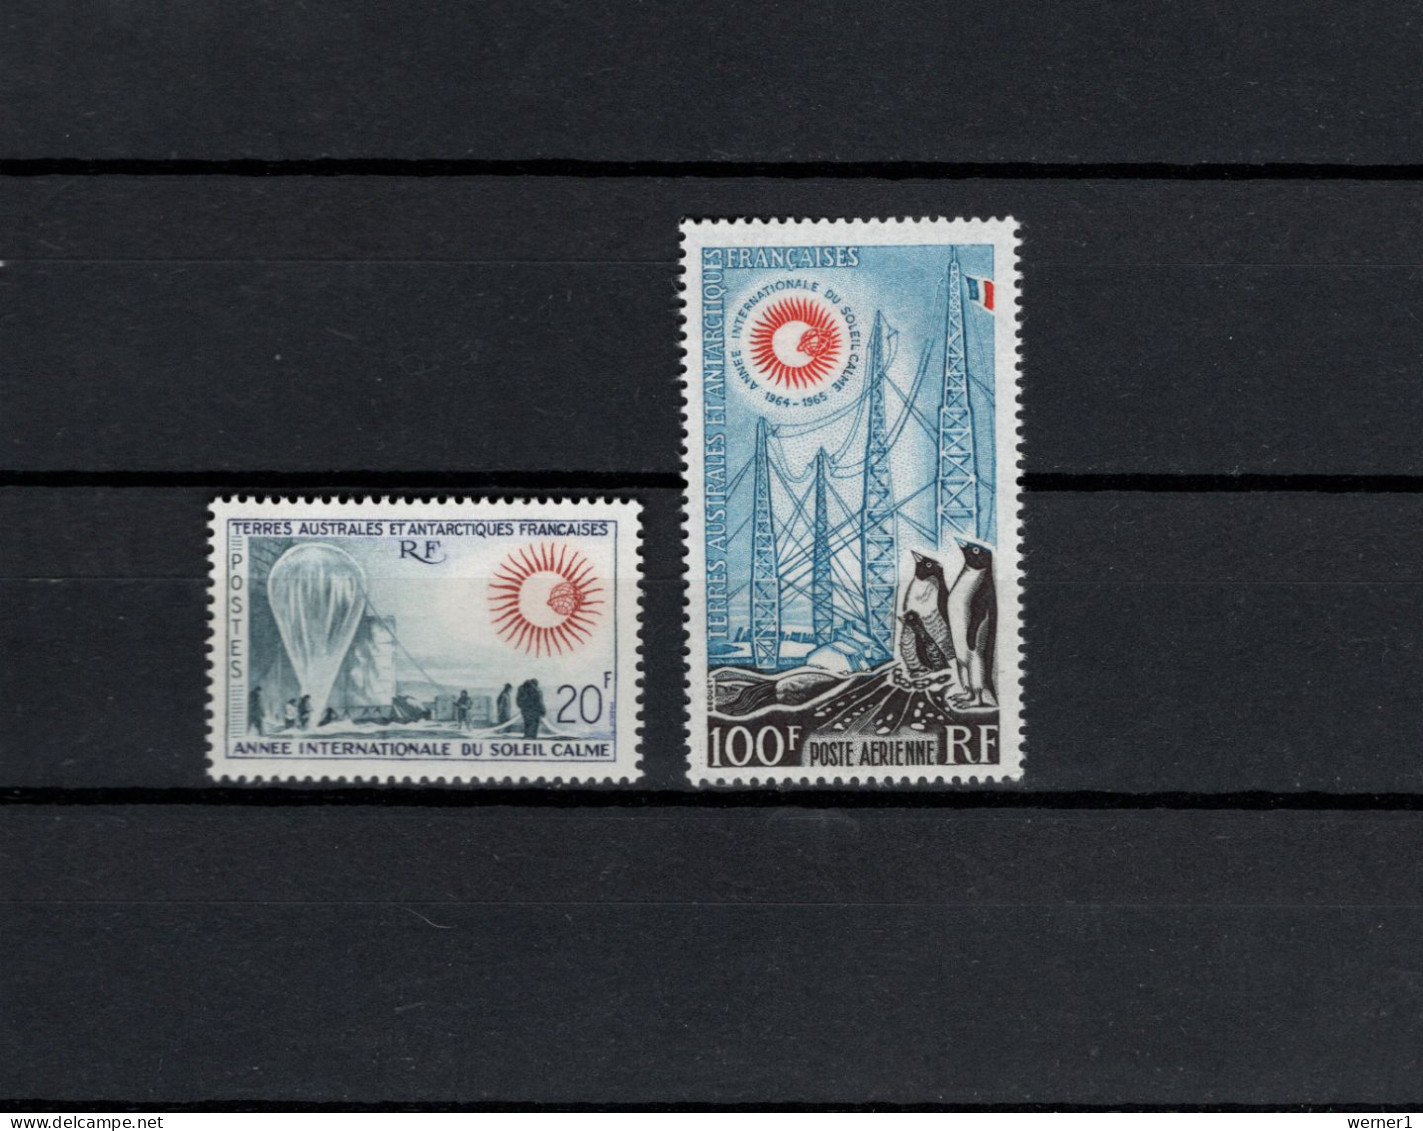 FSAT French Antarctic Territory 1963 Space, International Year Of The Quiet Sun Set Of 2 MNH -scarce- - Ozeanien